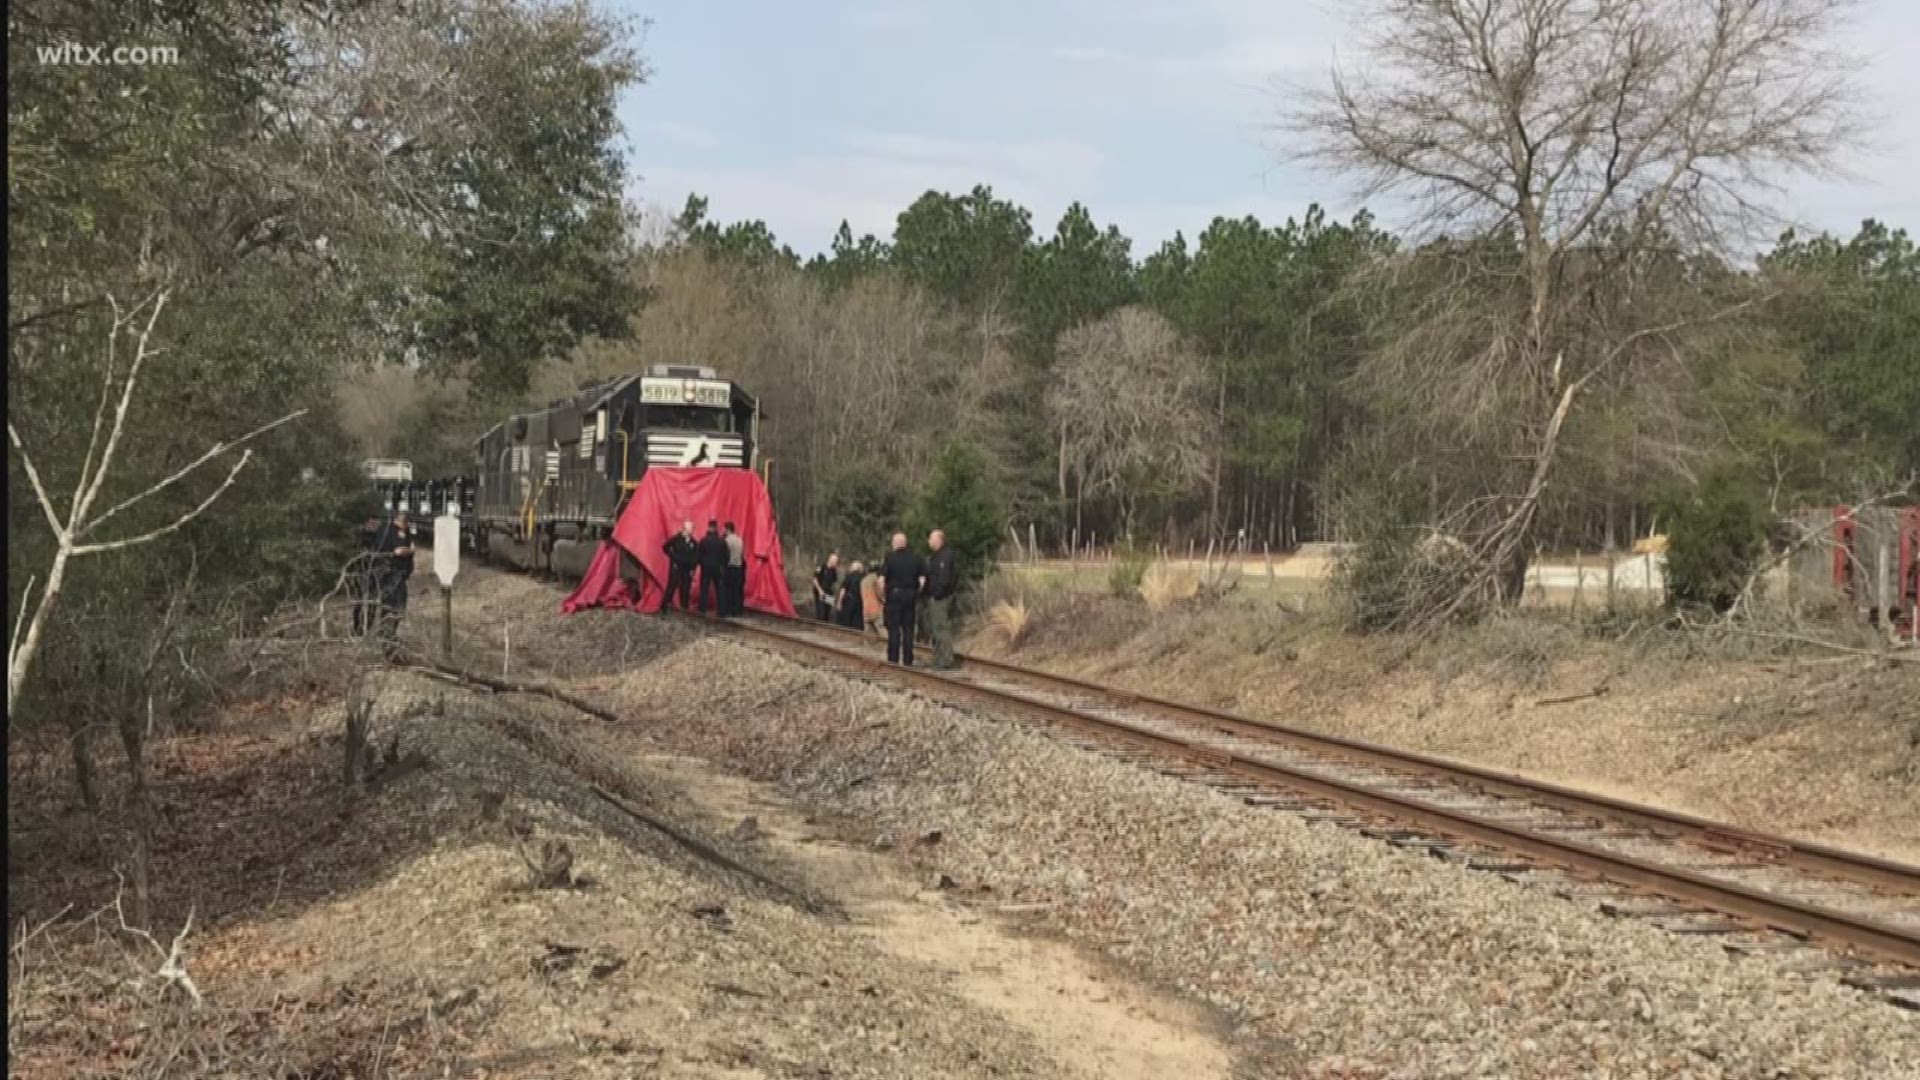 Kenneth Zeigler, 59, was killed by the train.  Deputies say that Zeigler, who was deaf, never heard the train when he was struck.